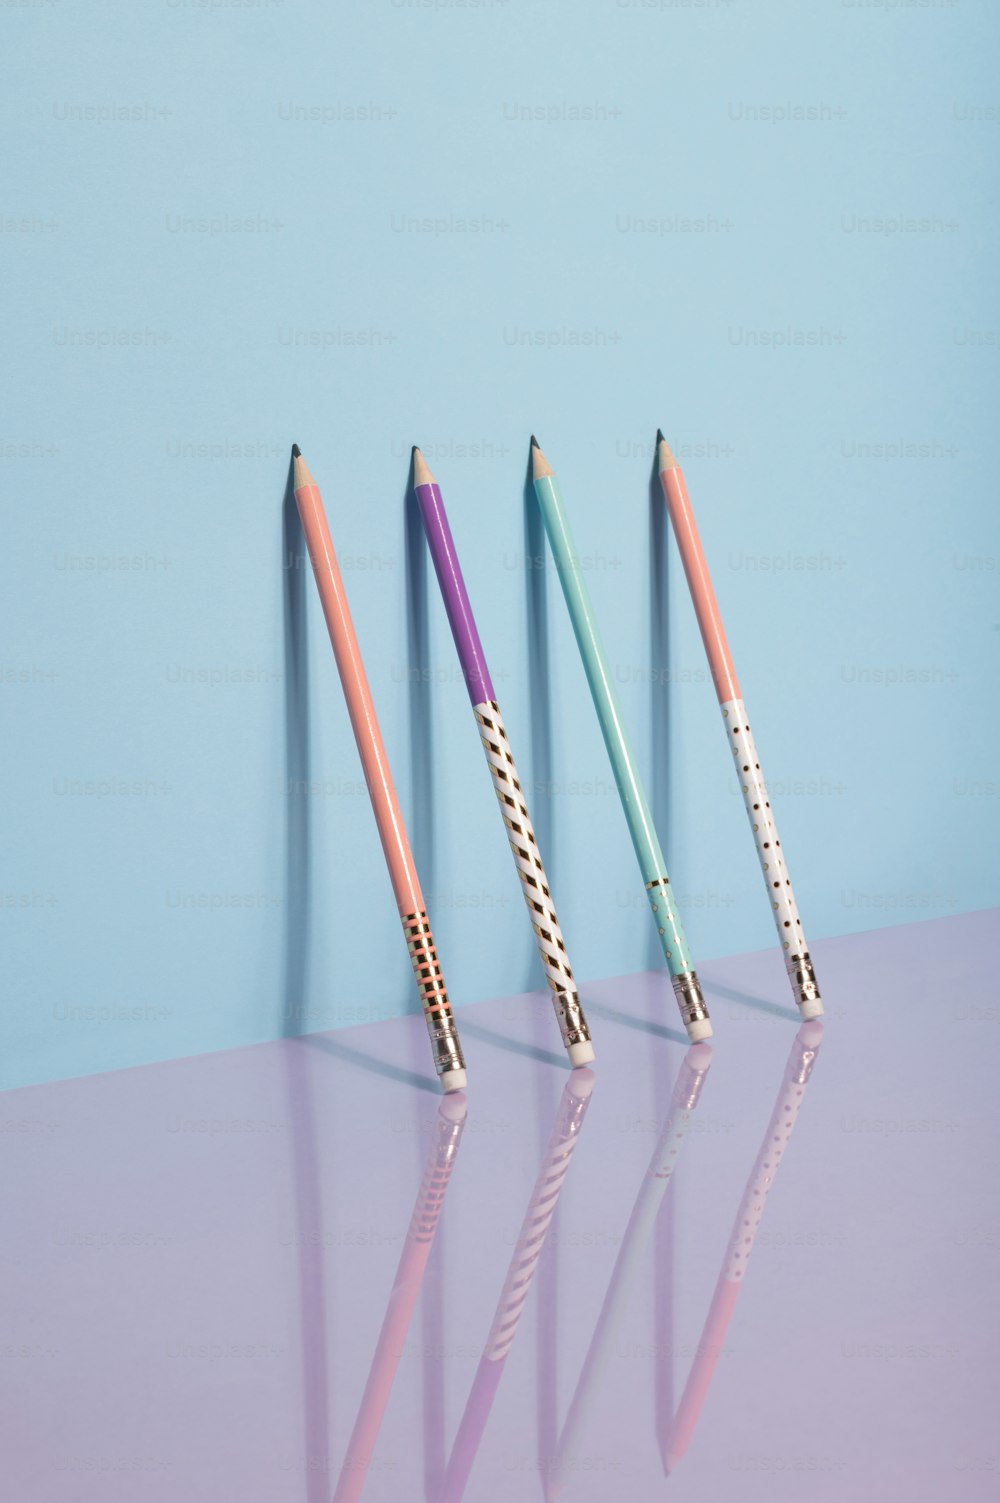 three different colored pencils are lined up in a row